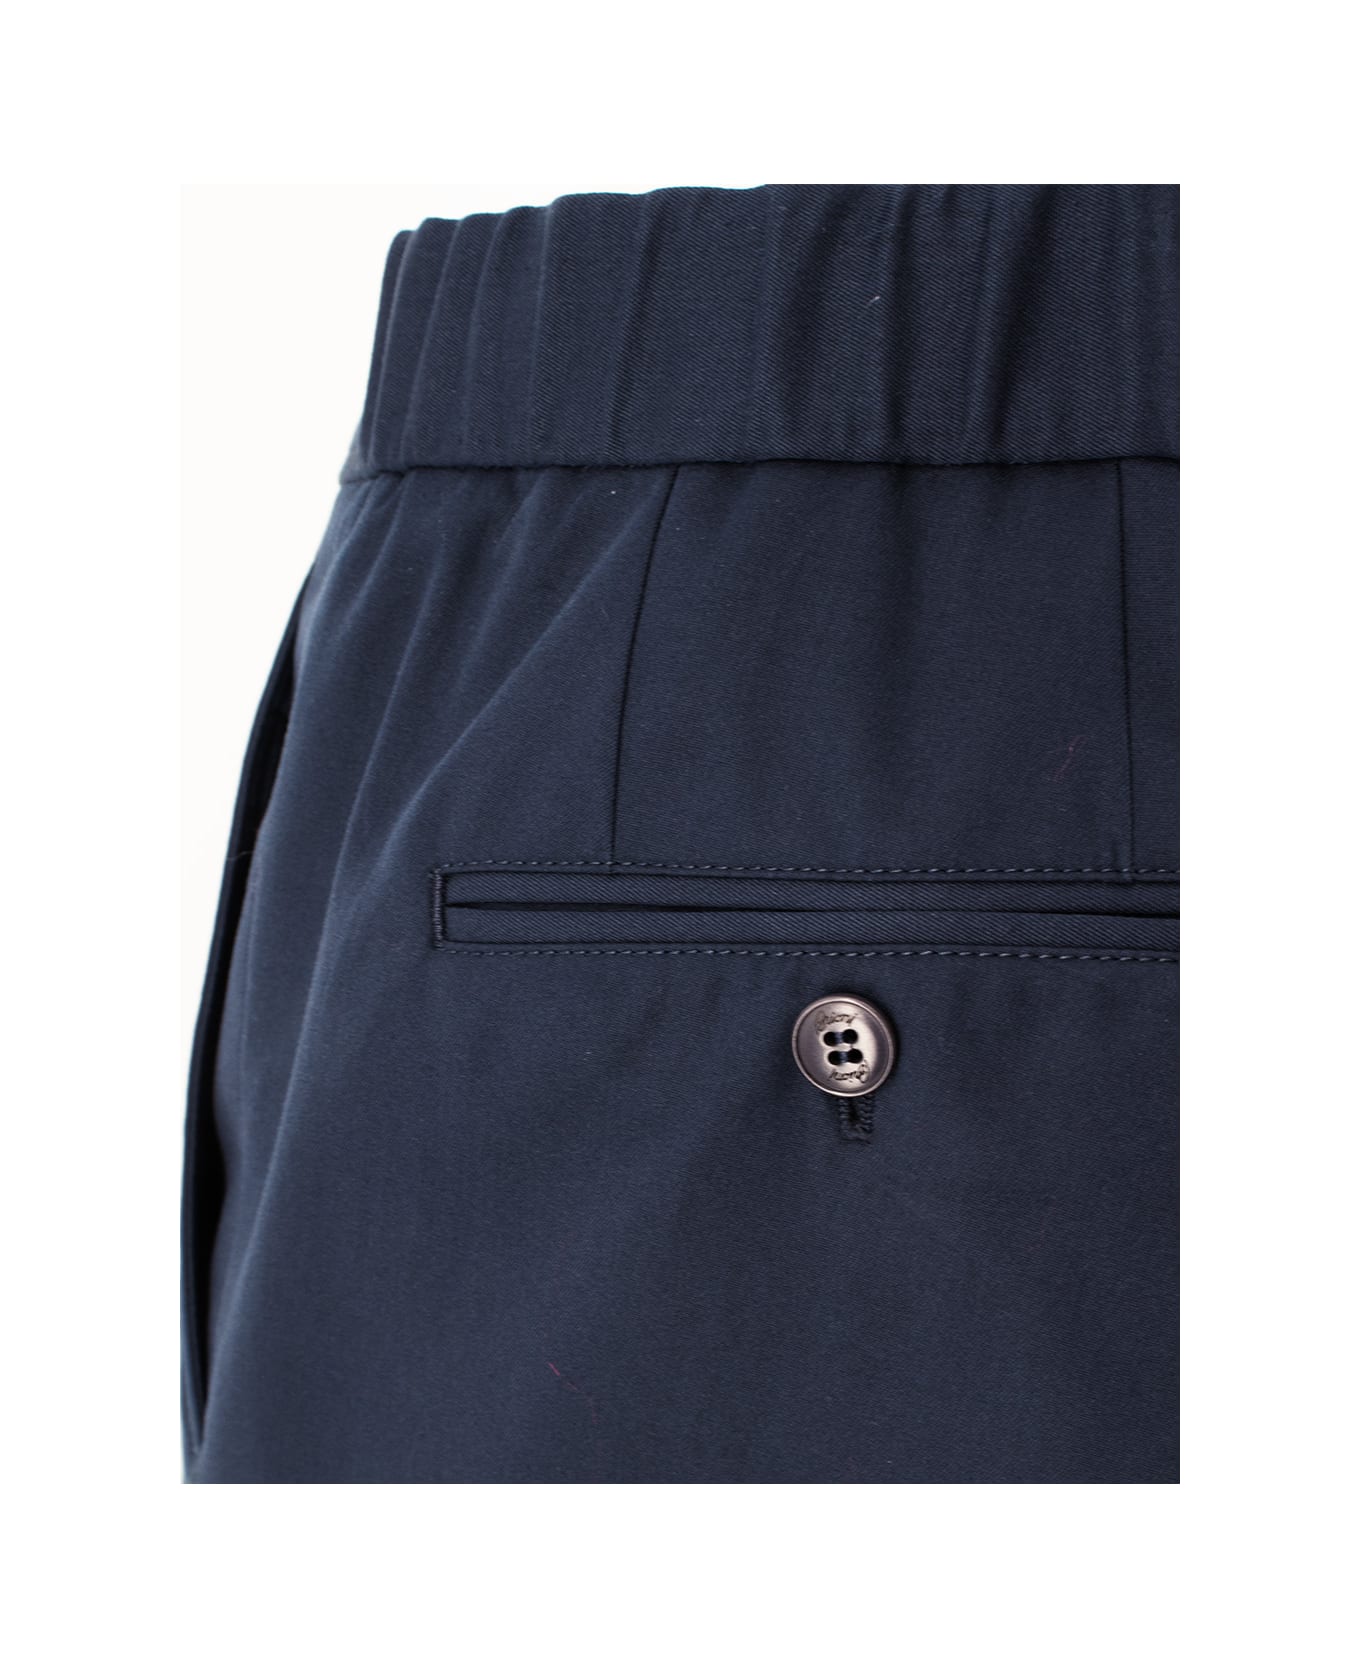 Brioni Trousers - MIDNIGHT BLUE ボトムス